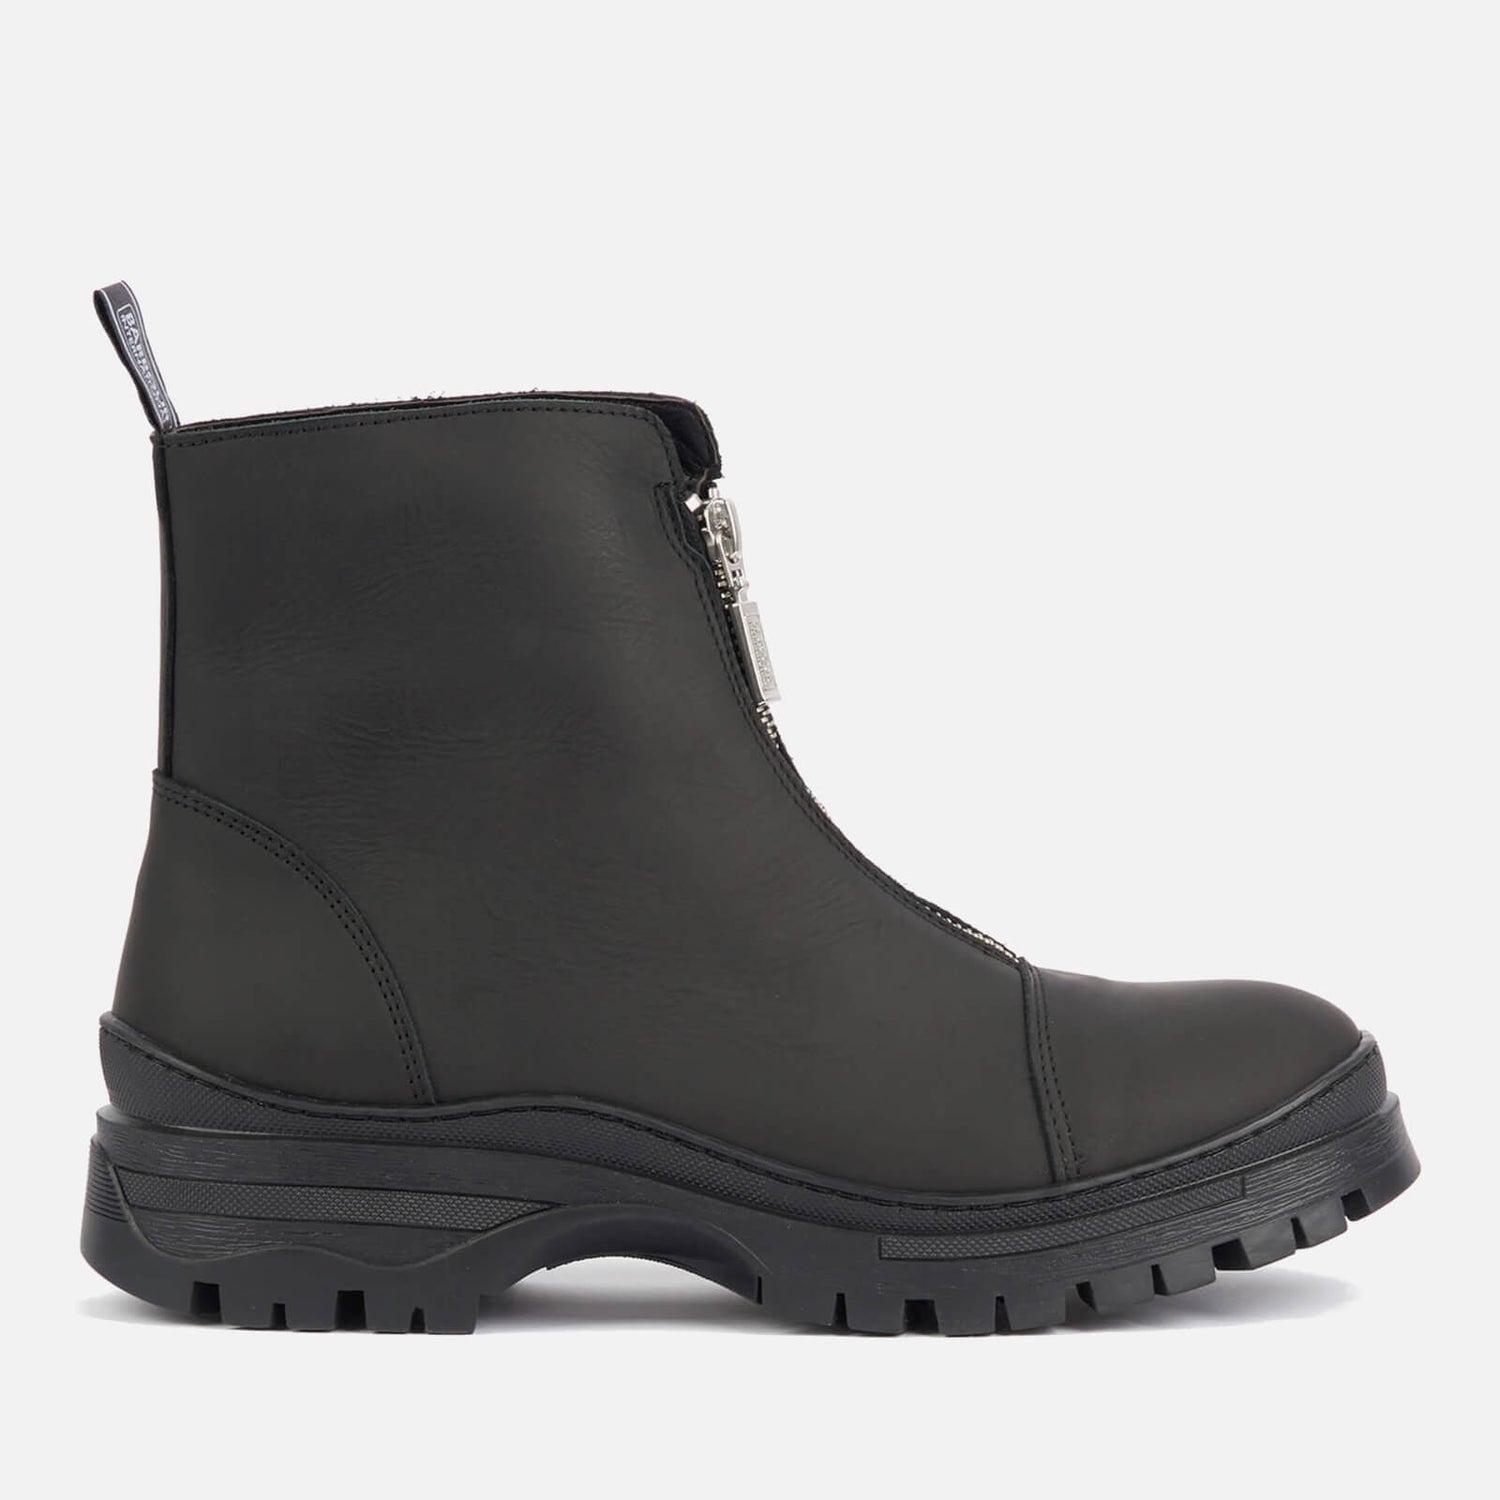 Barbour International Cora Leather Zip Front Boots